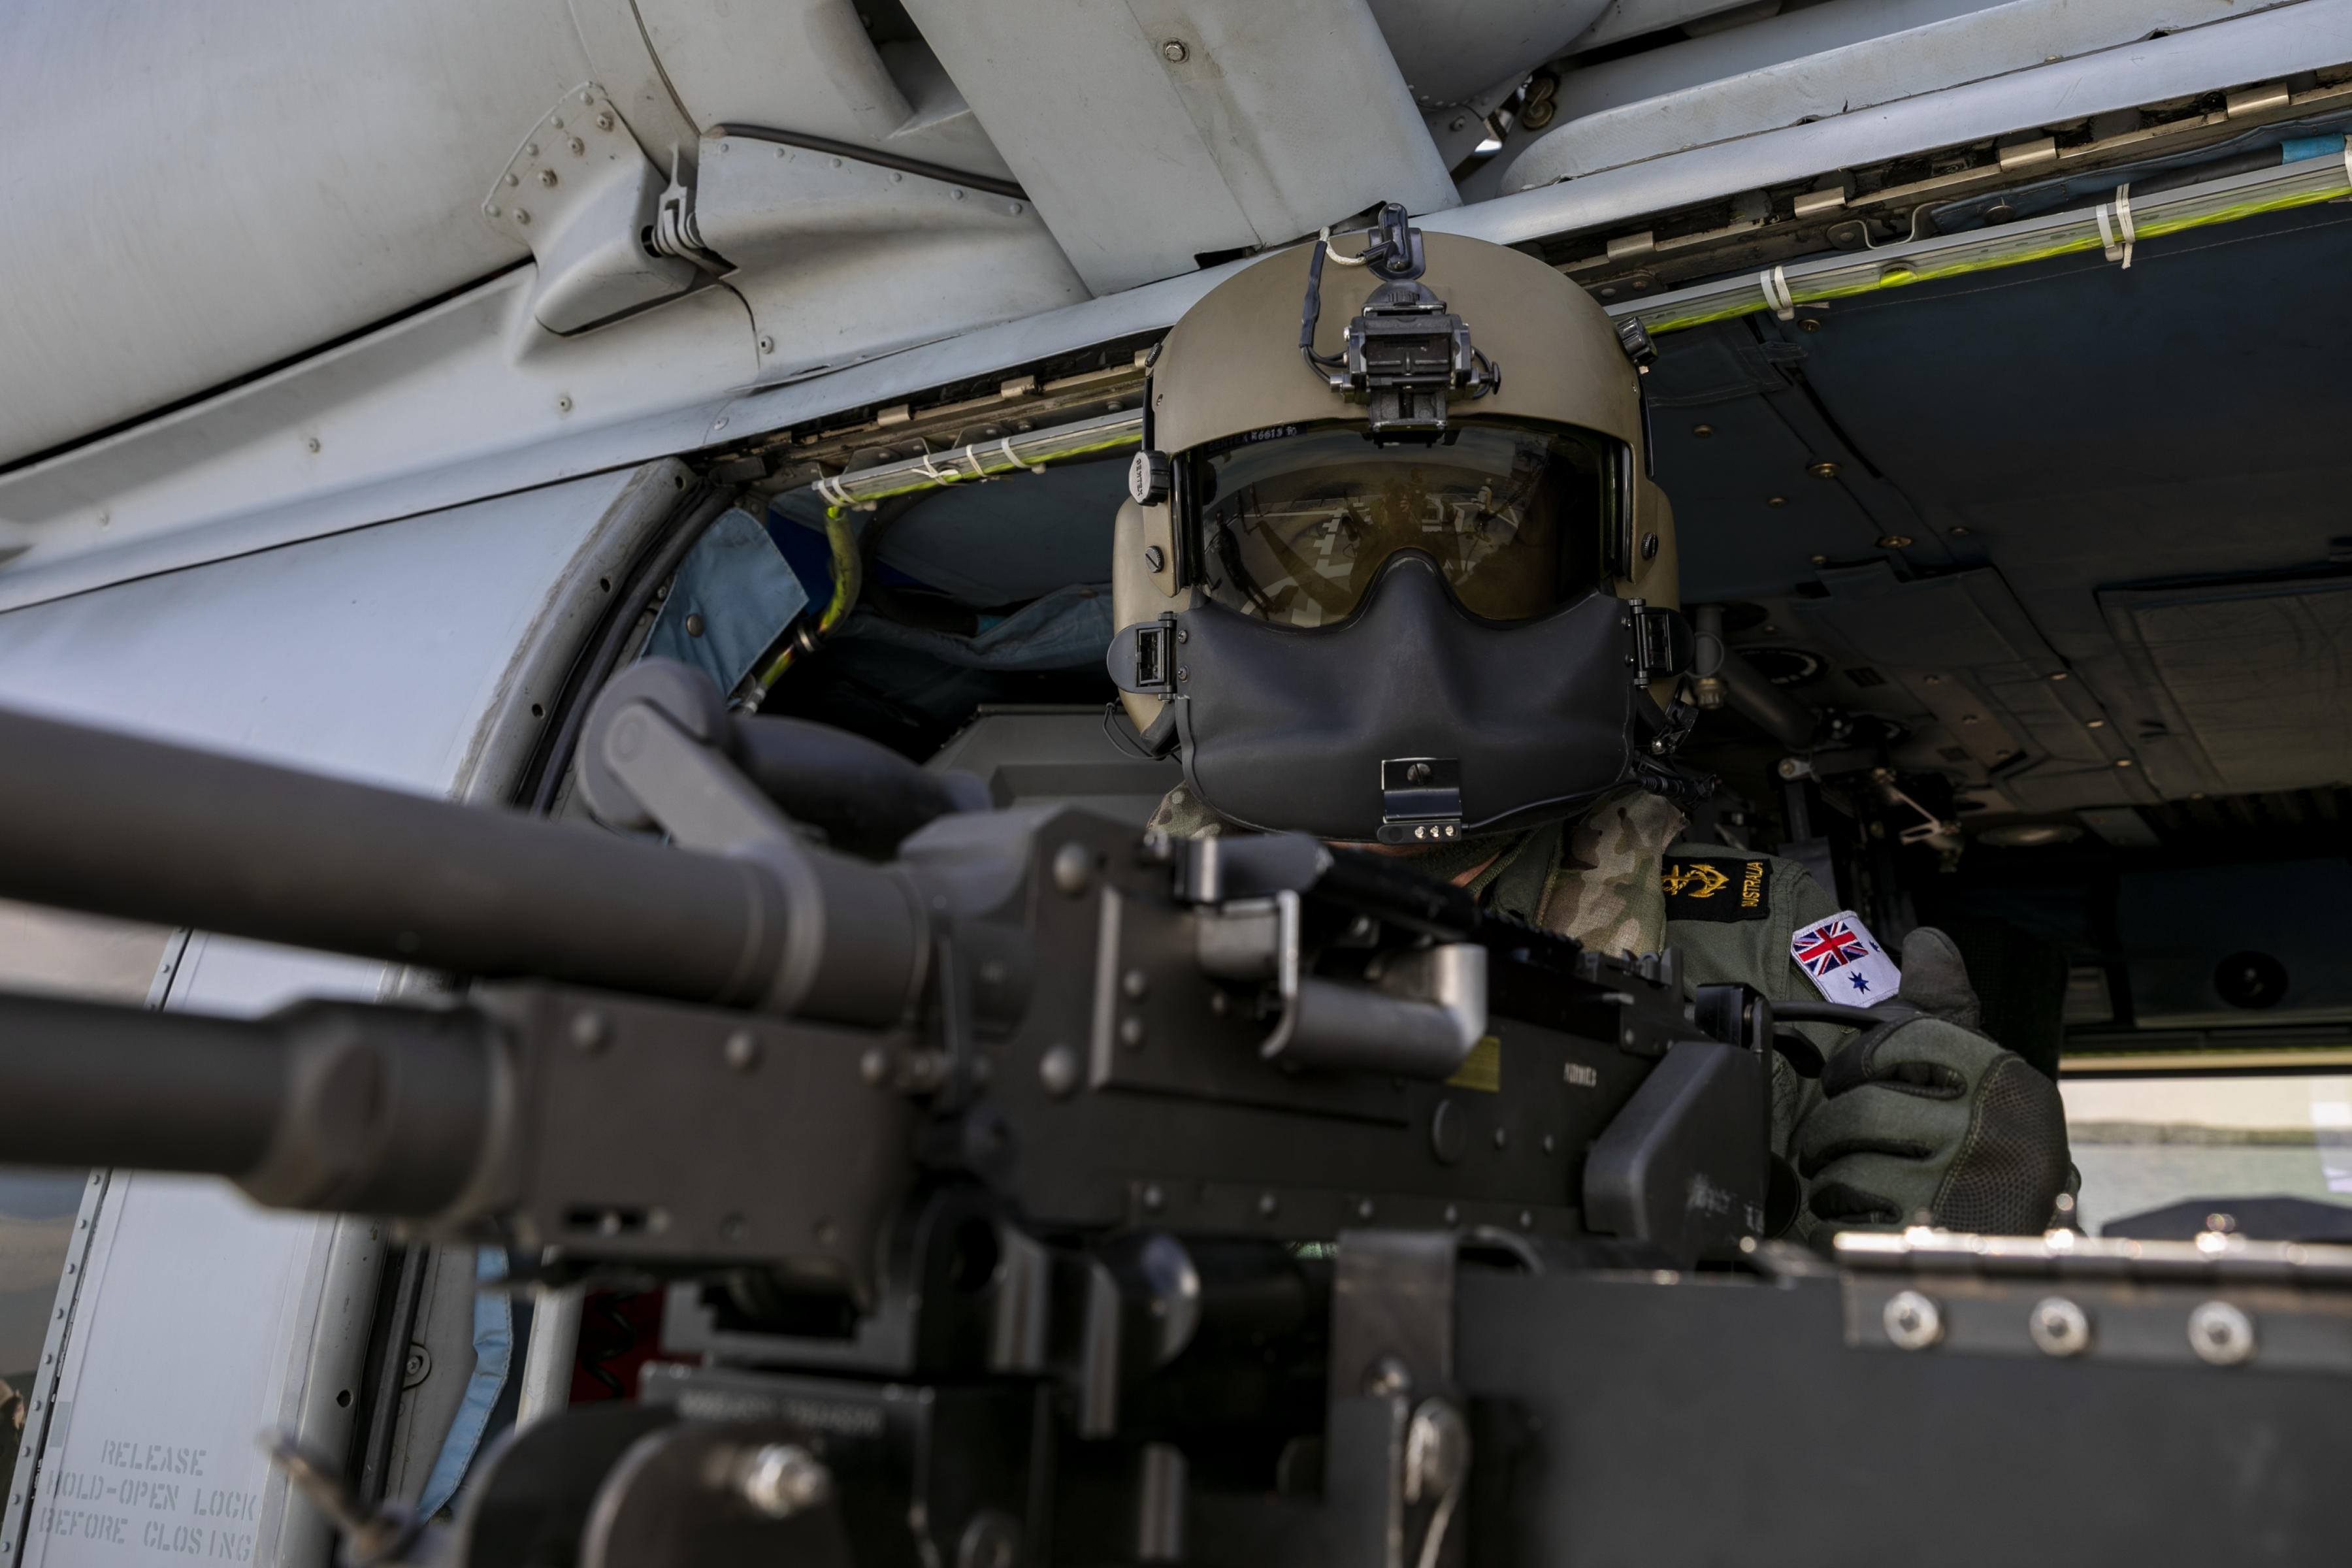 Leading Seaman Aircrew Michael Sales conducts pre-flight inspections of a Mag 58 machine gun on the Seahawk MH-60R helicopter embarked on HMAS Parramatta.